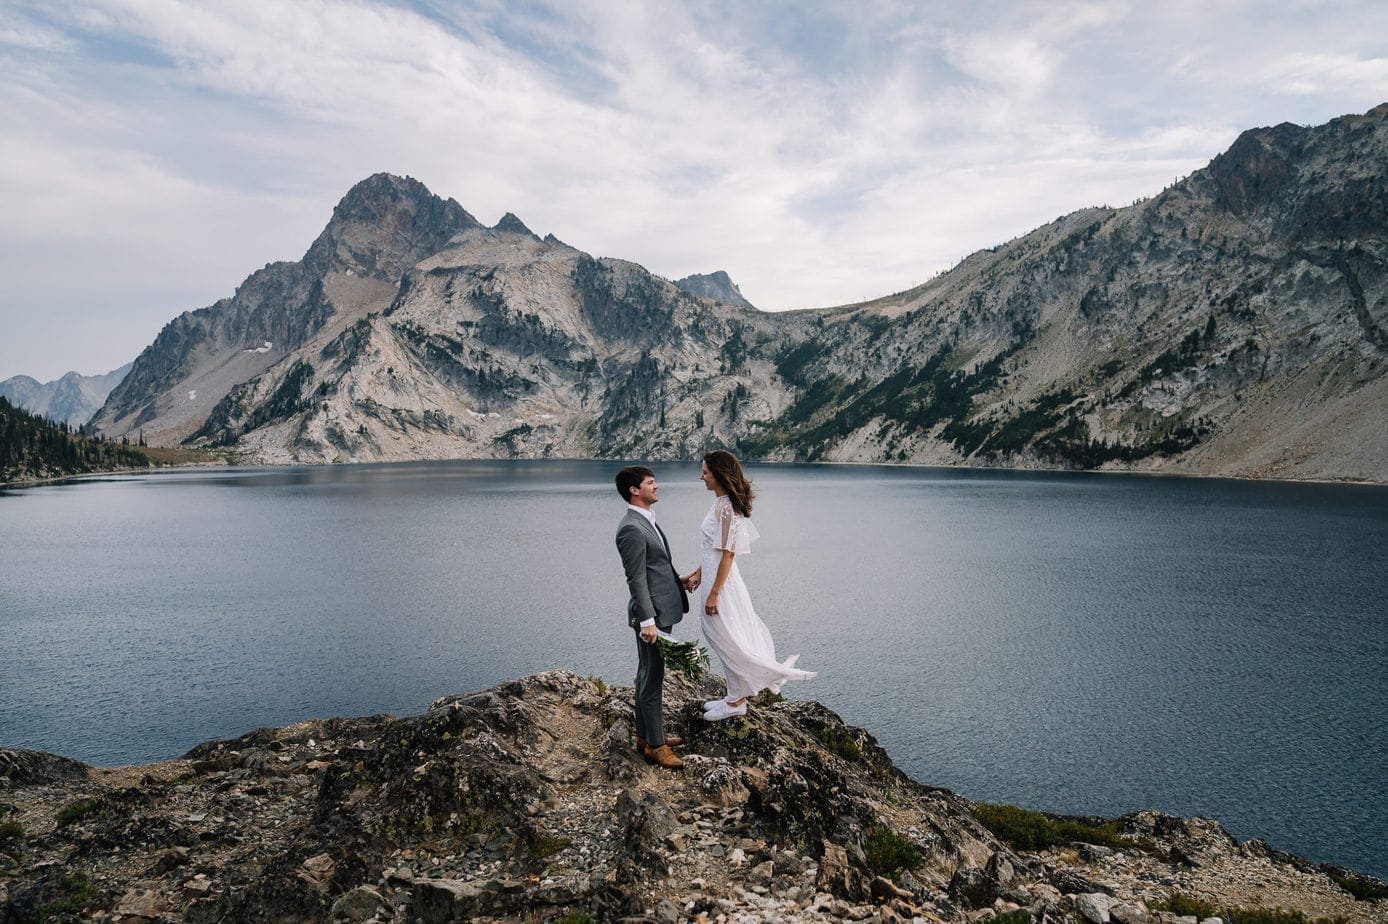 This Idaho wedding day was filled with epic views of the Sawtooth Mountains.